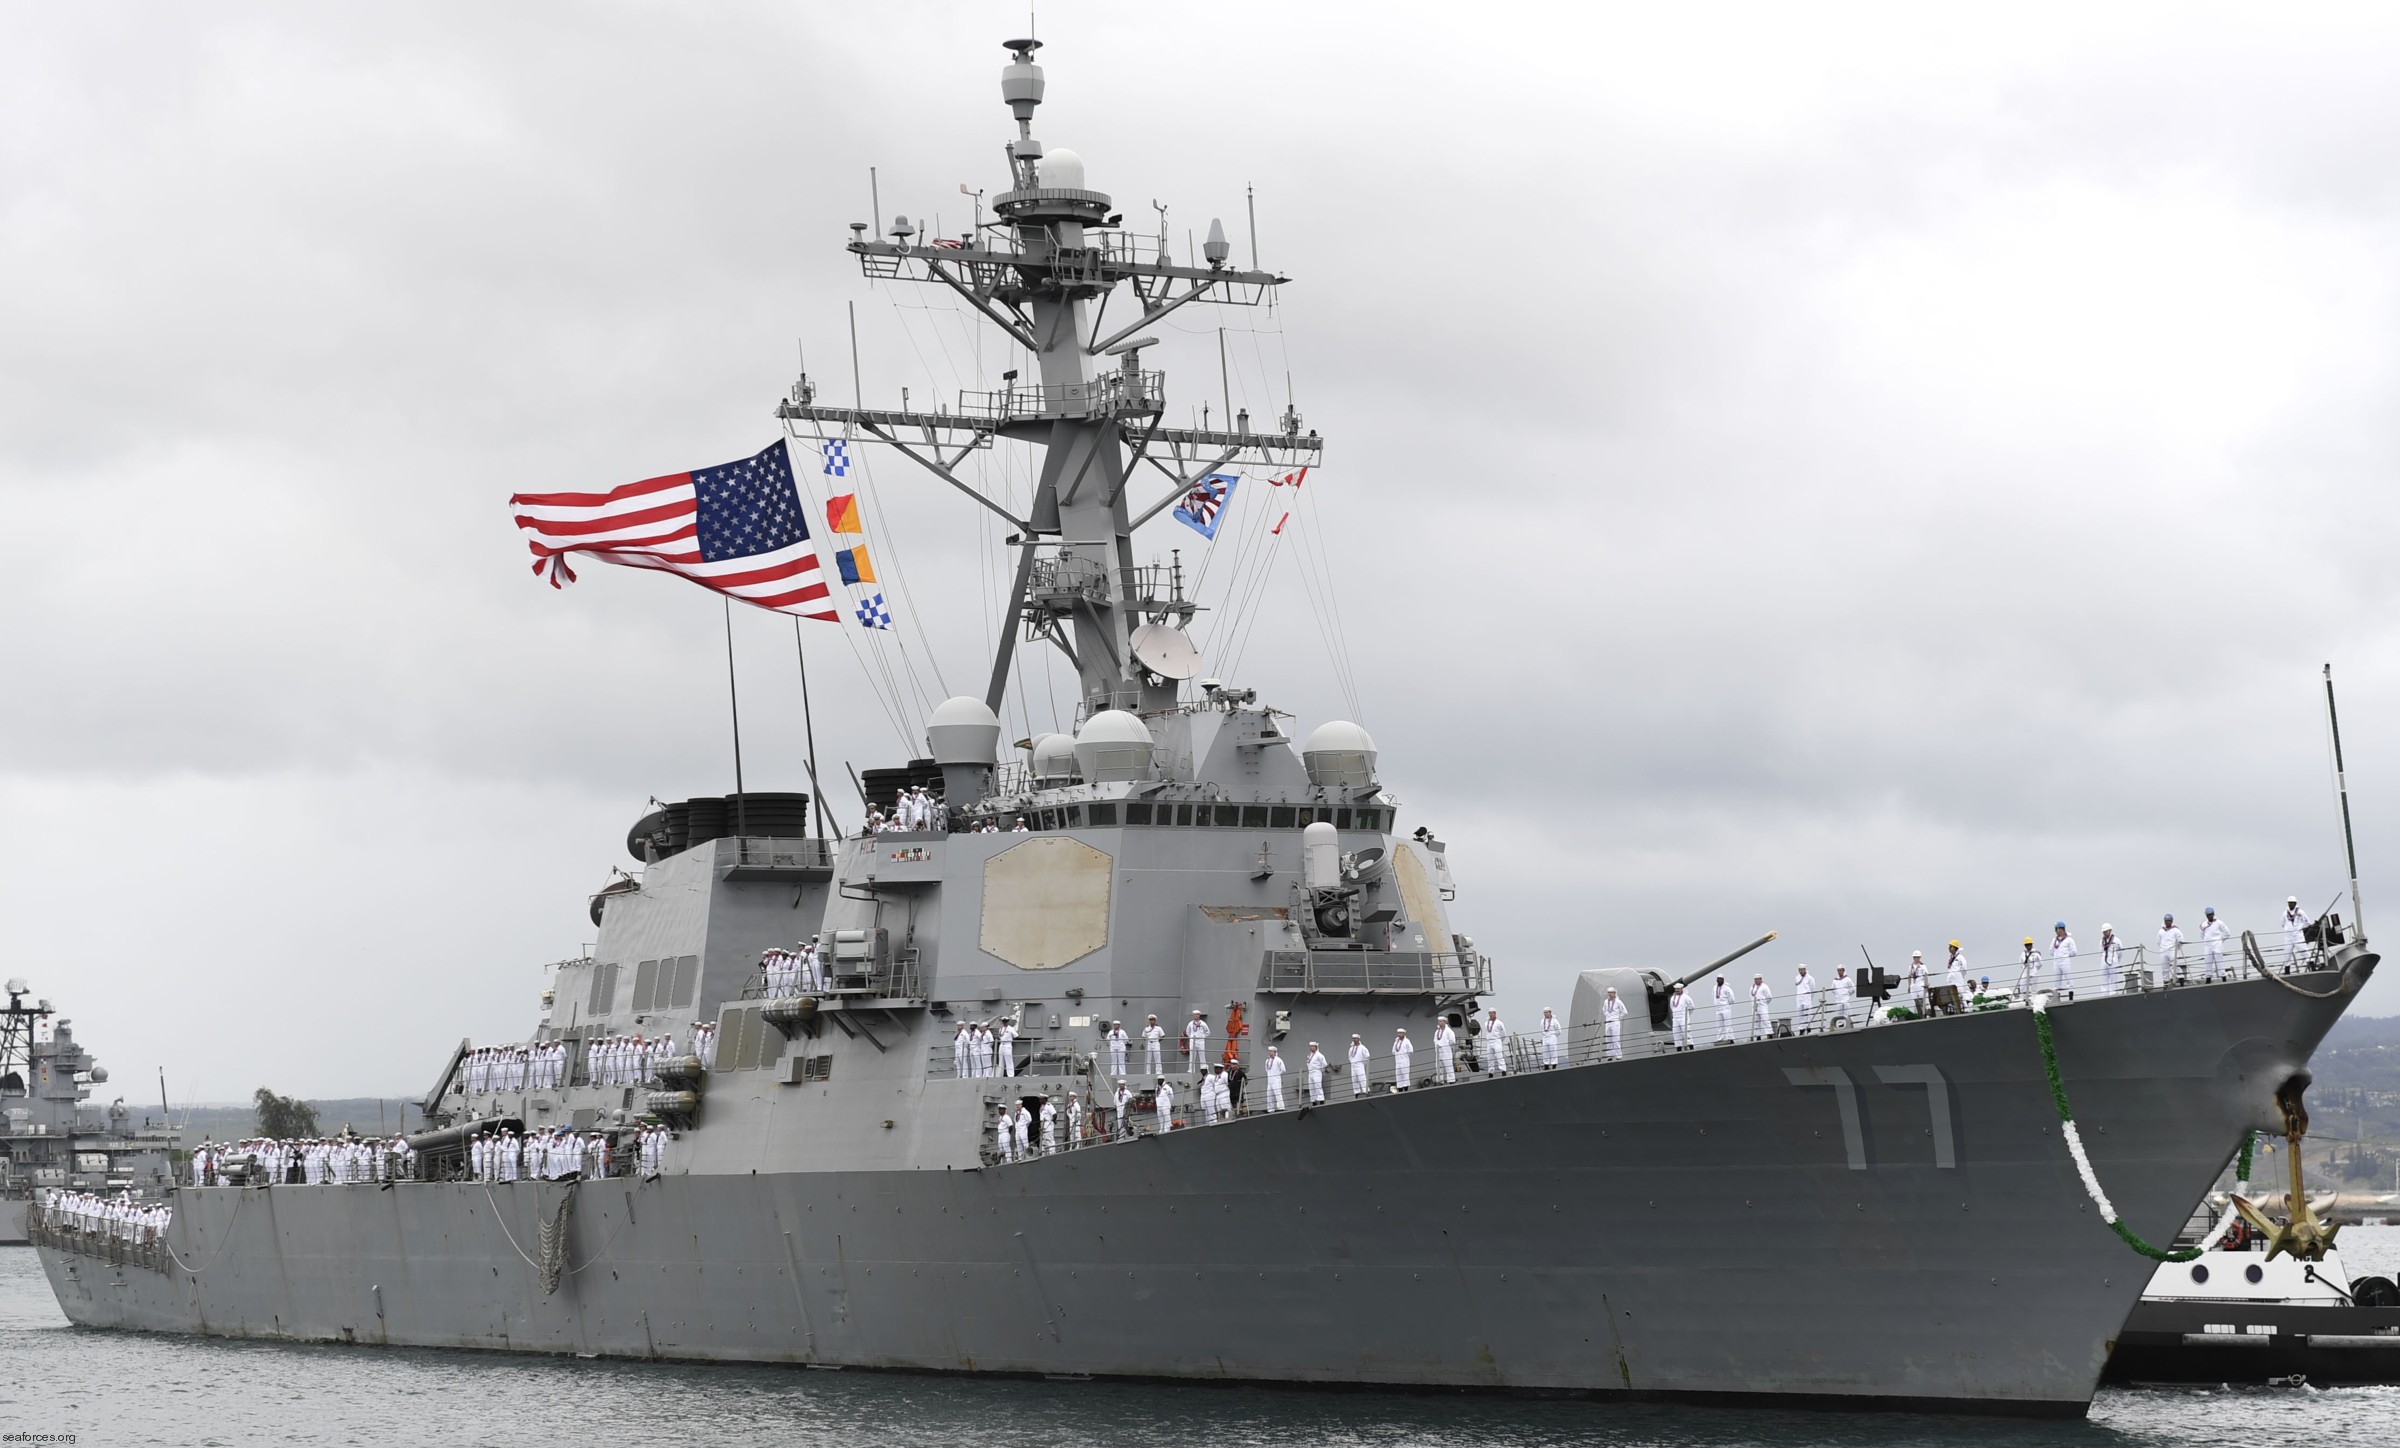 ddg-77 uss o'kane guided missile destroyer arleigh burke class navy aegis 07 joint base pearl harbor hickam hawaii exercise rimpac